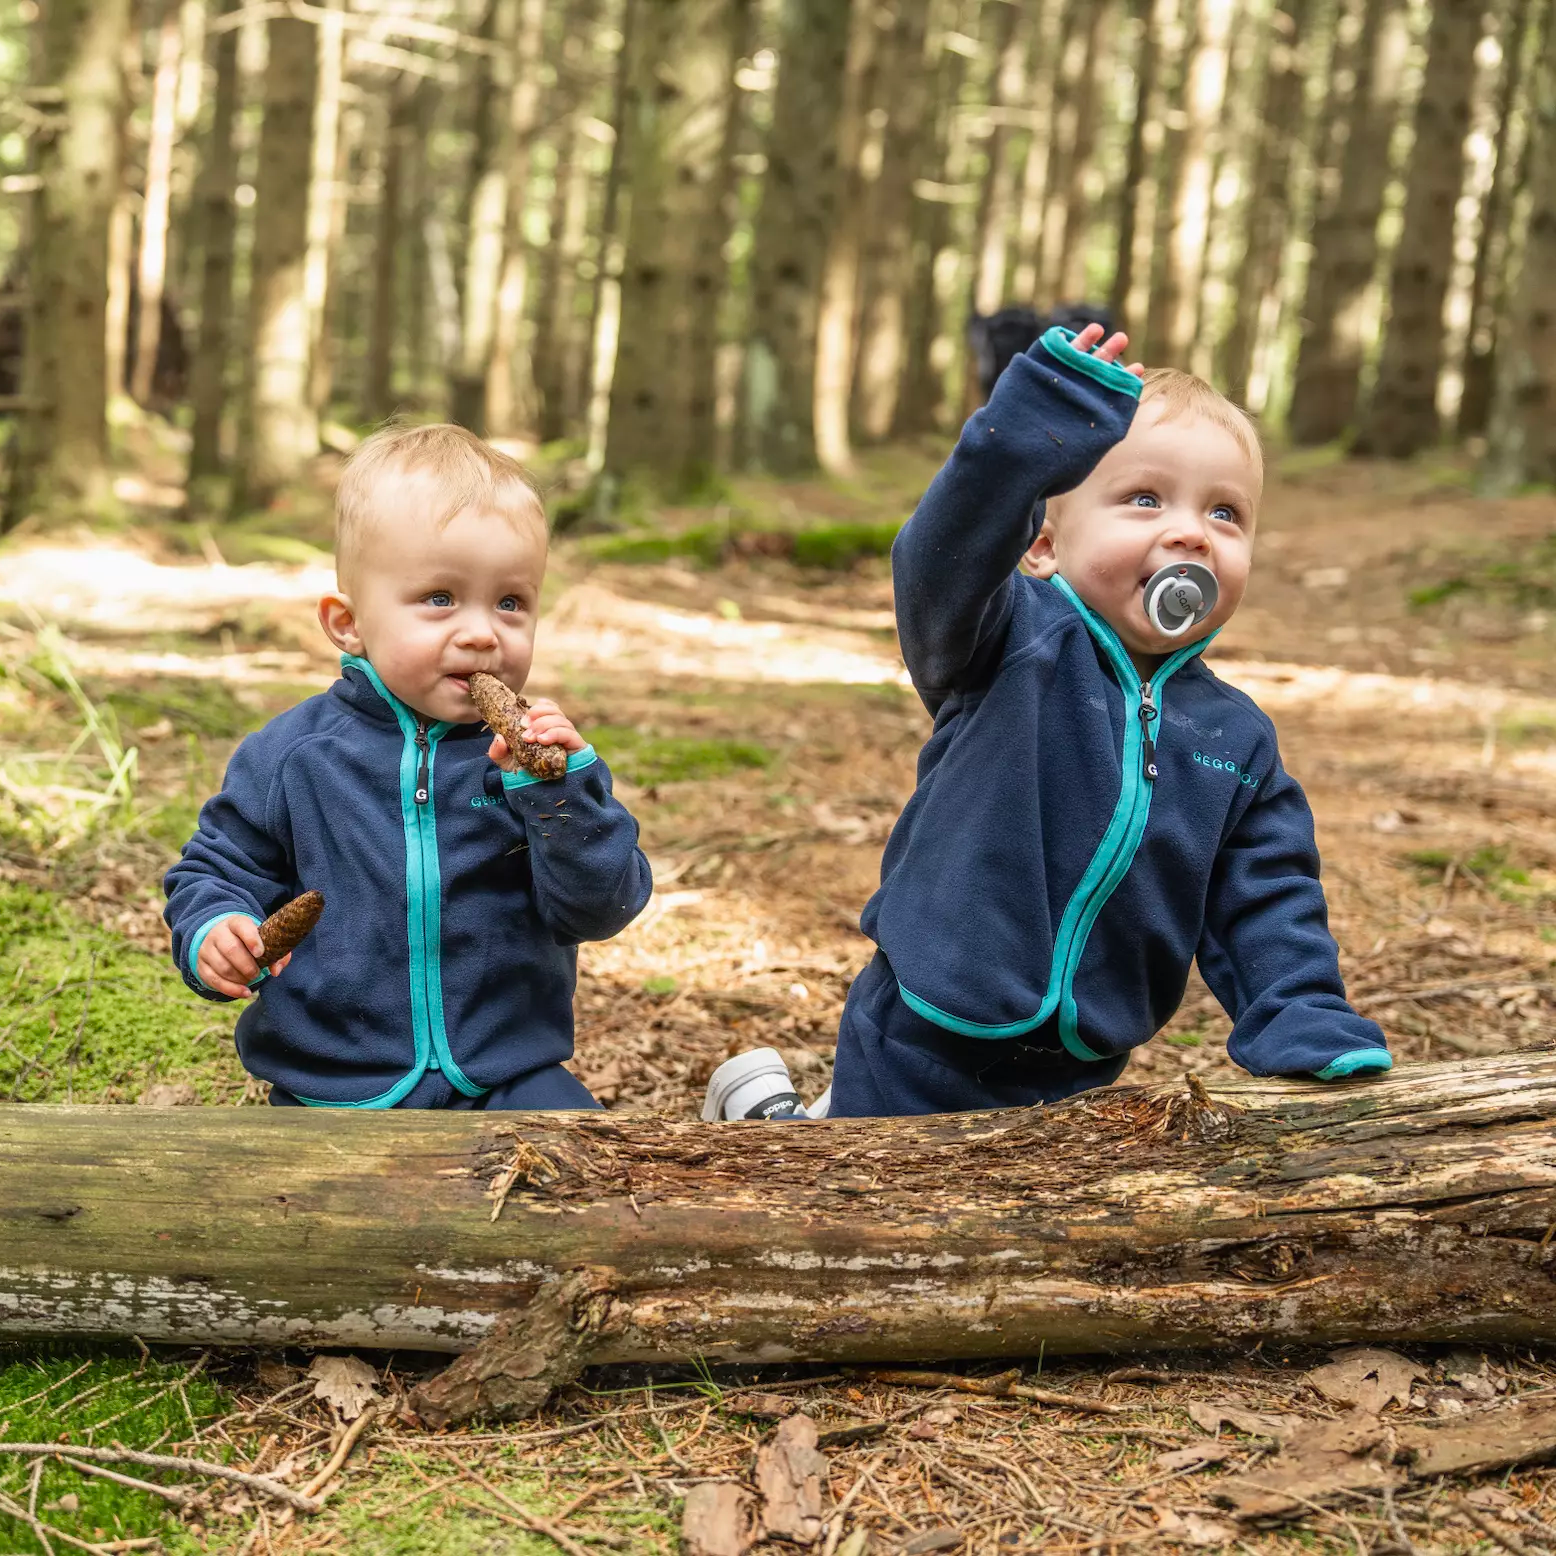 How do you choose environmentally friendly and sustainable children's clothing?